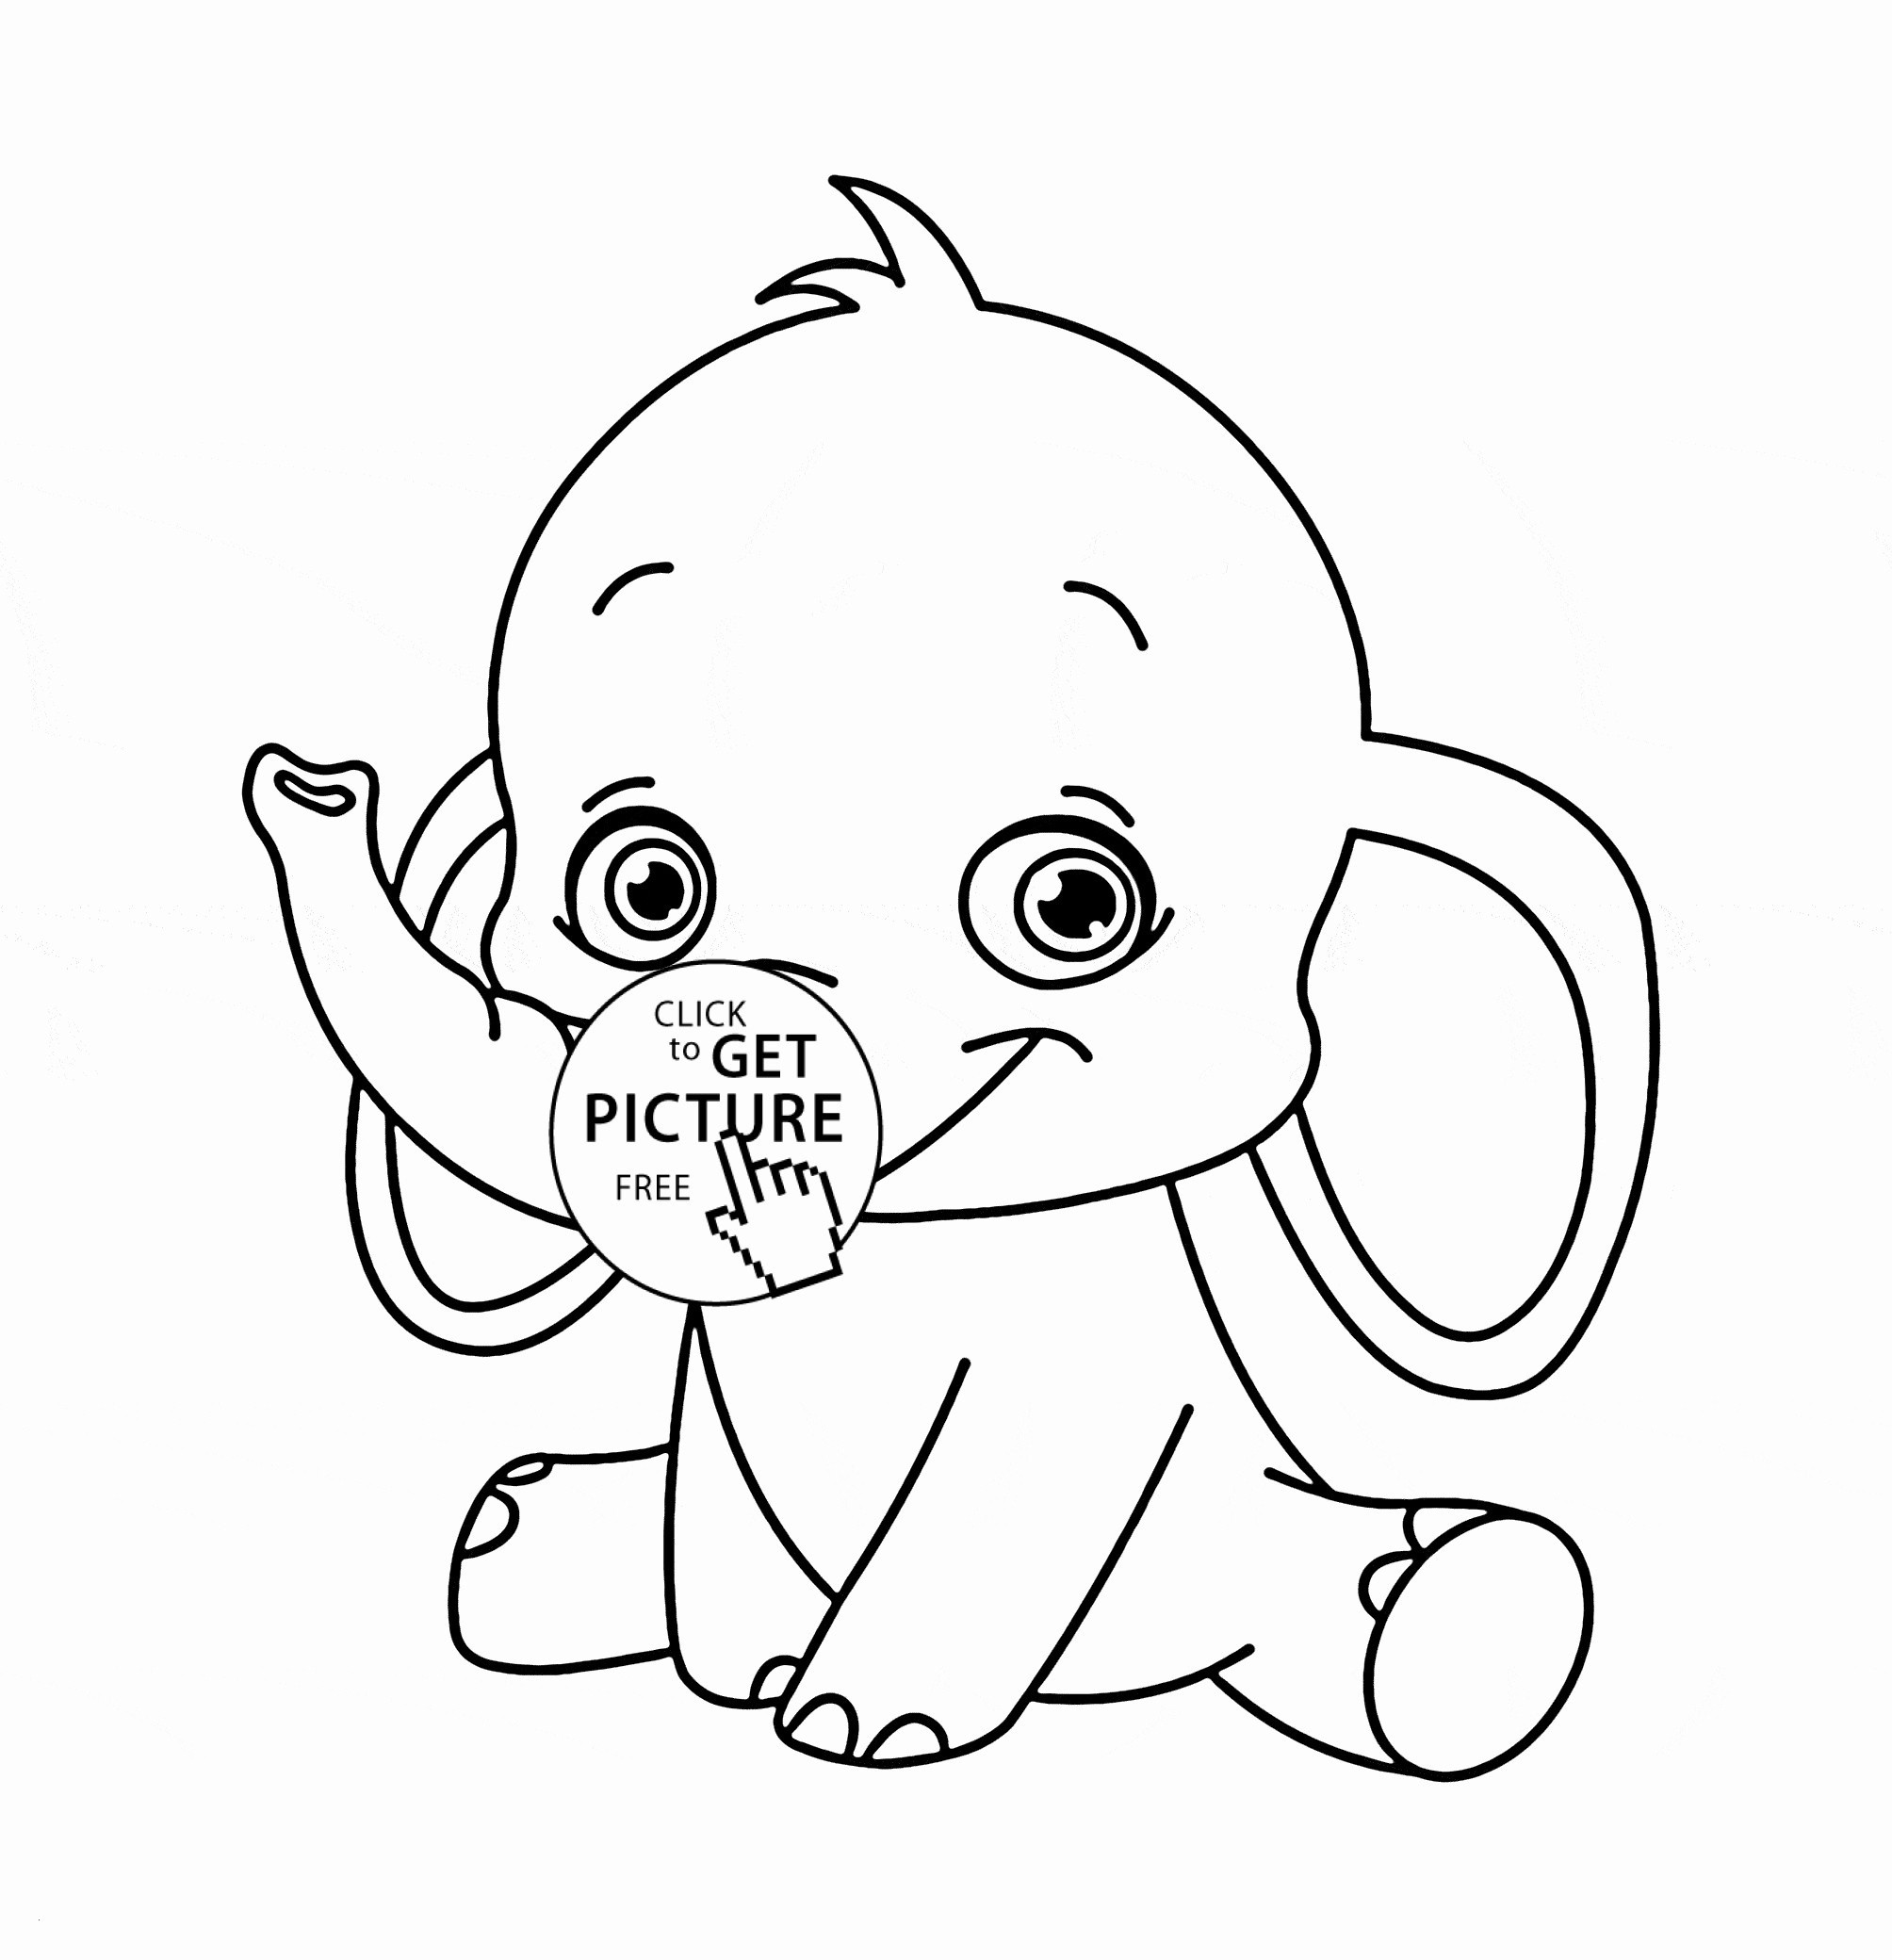 Cute Baby Animal Coloring Pages Unique Fresh Home Coloring Pages Best Color Sheet 0d – Modokom